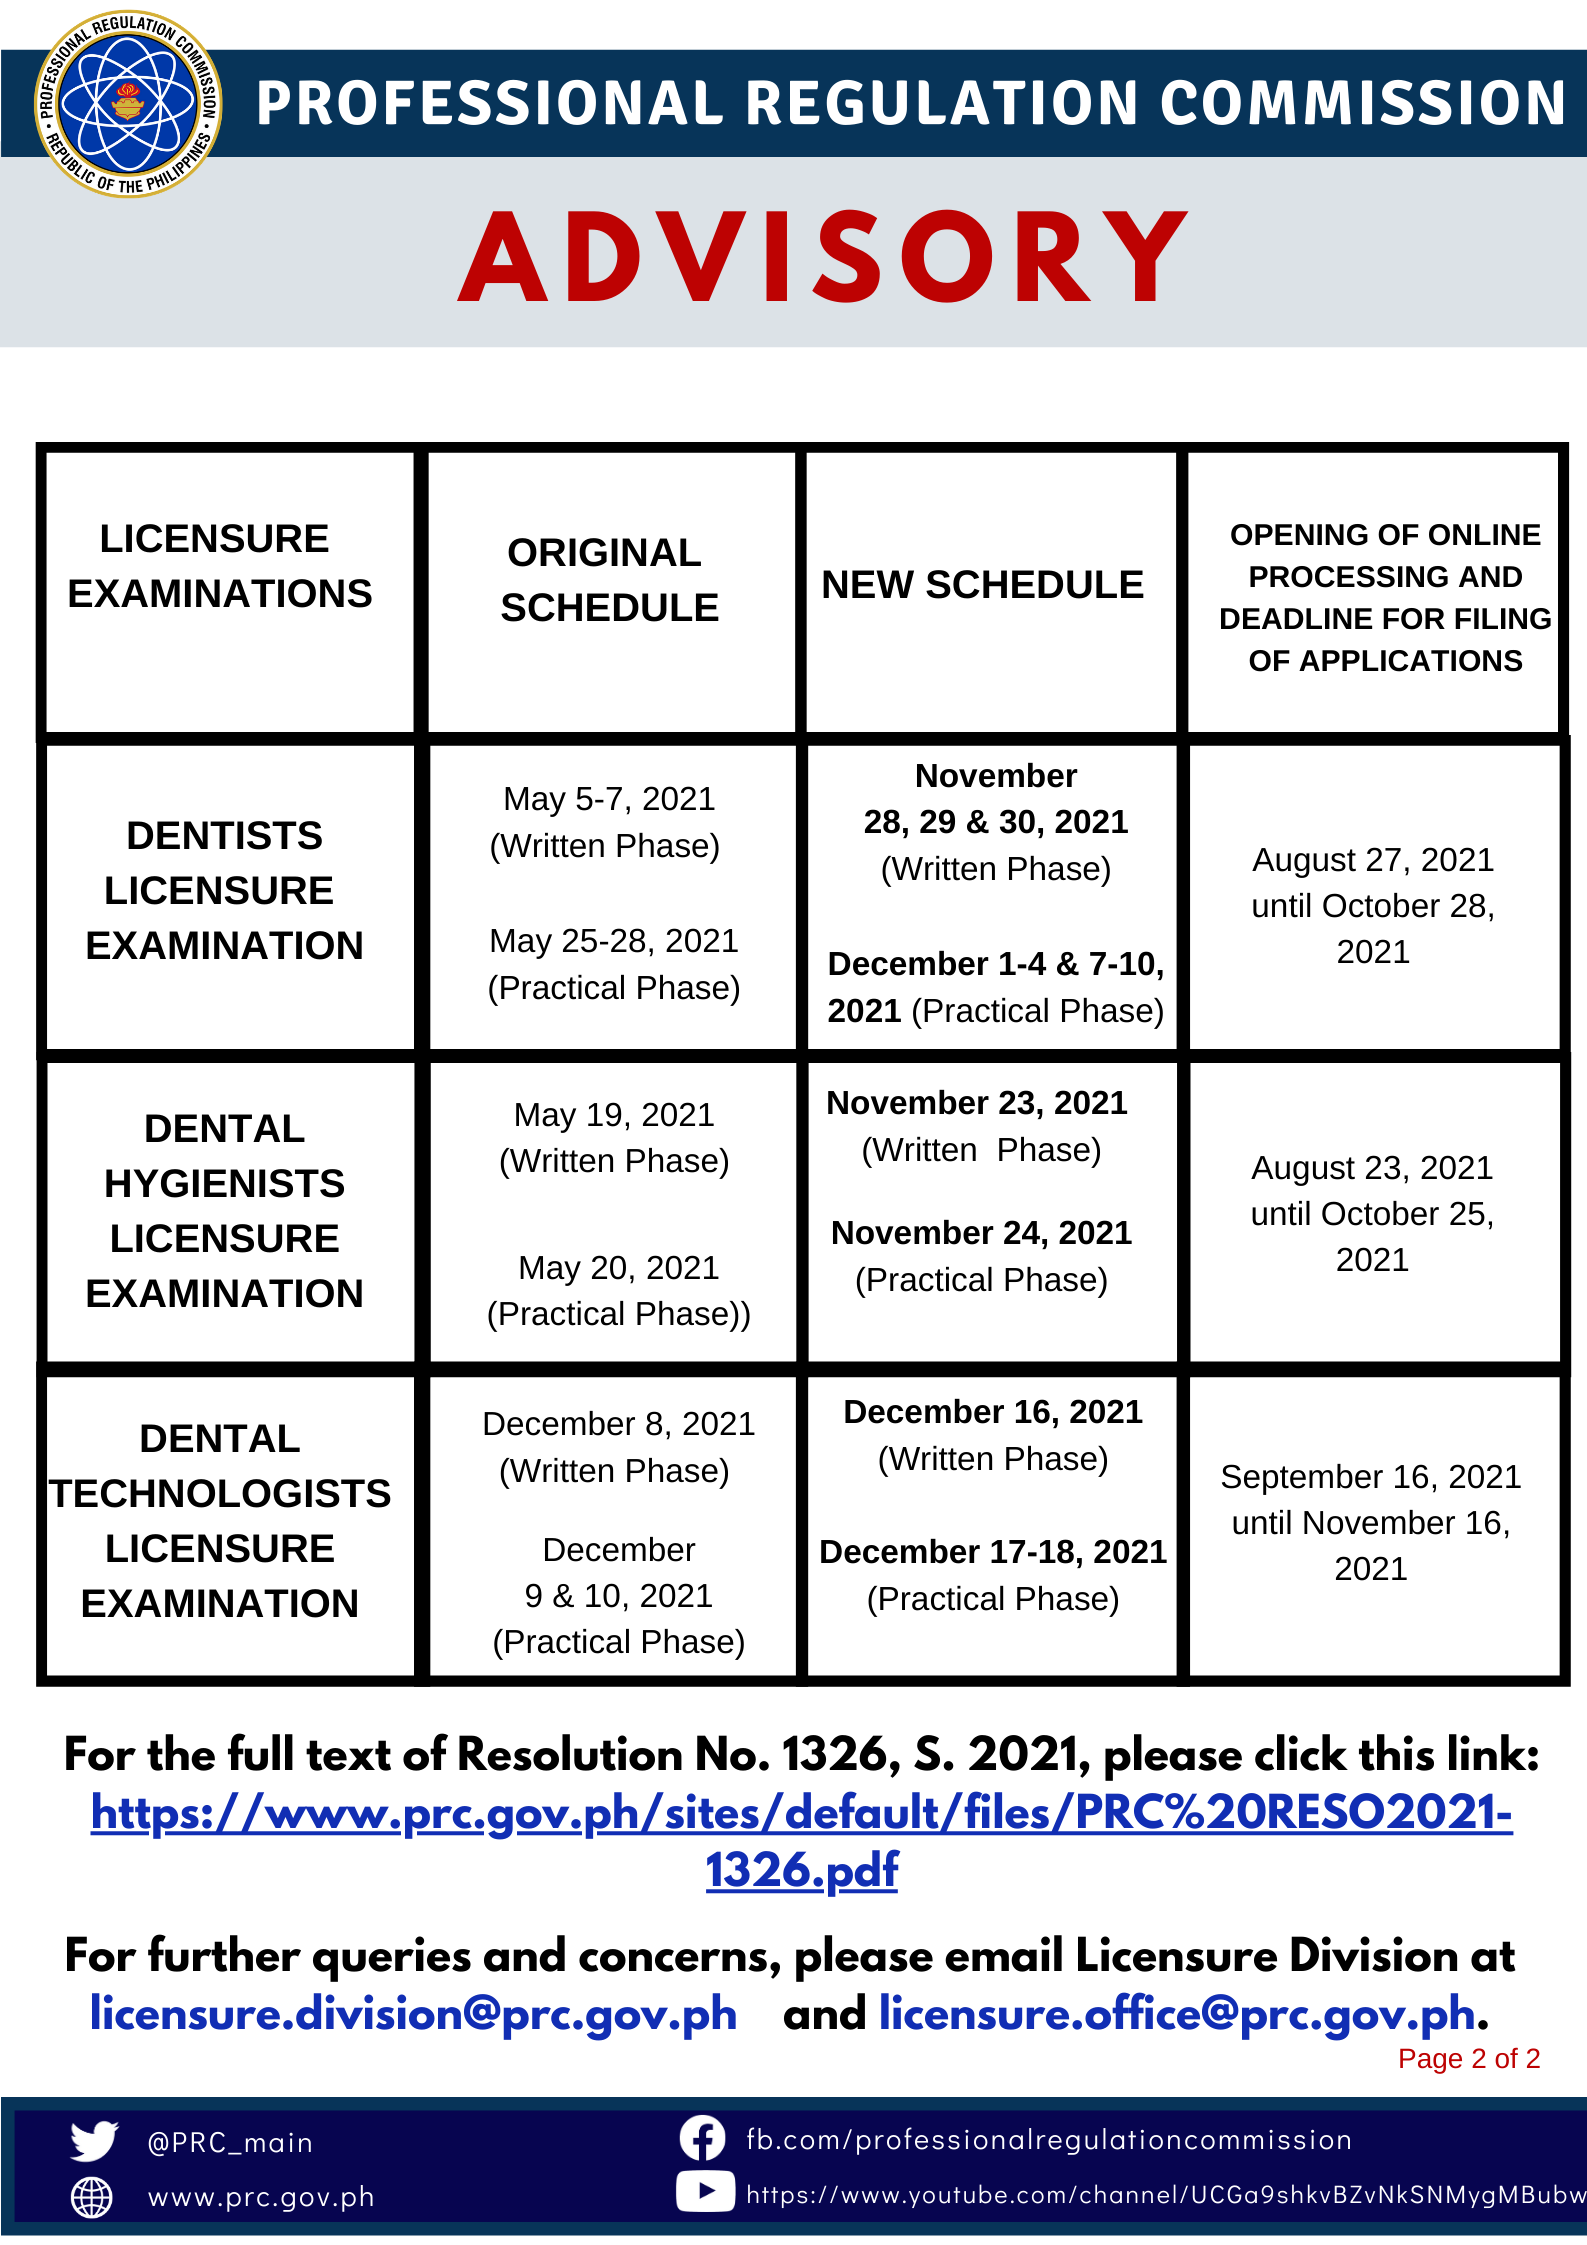 New Schedule for the Conduct of Licensure Examinations for Dentists